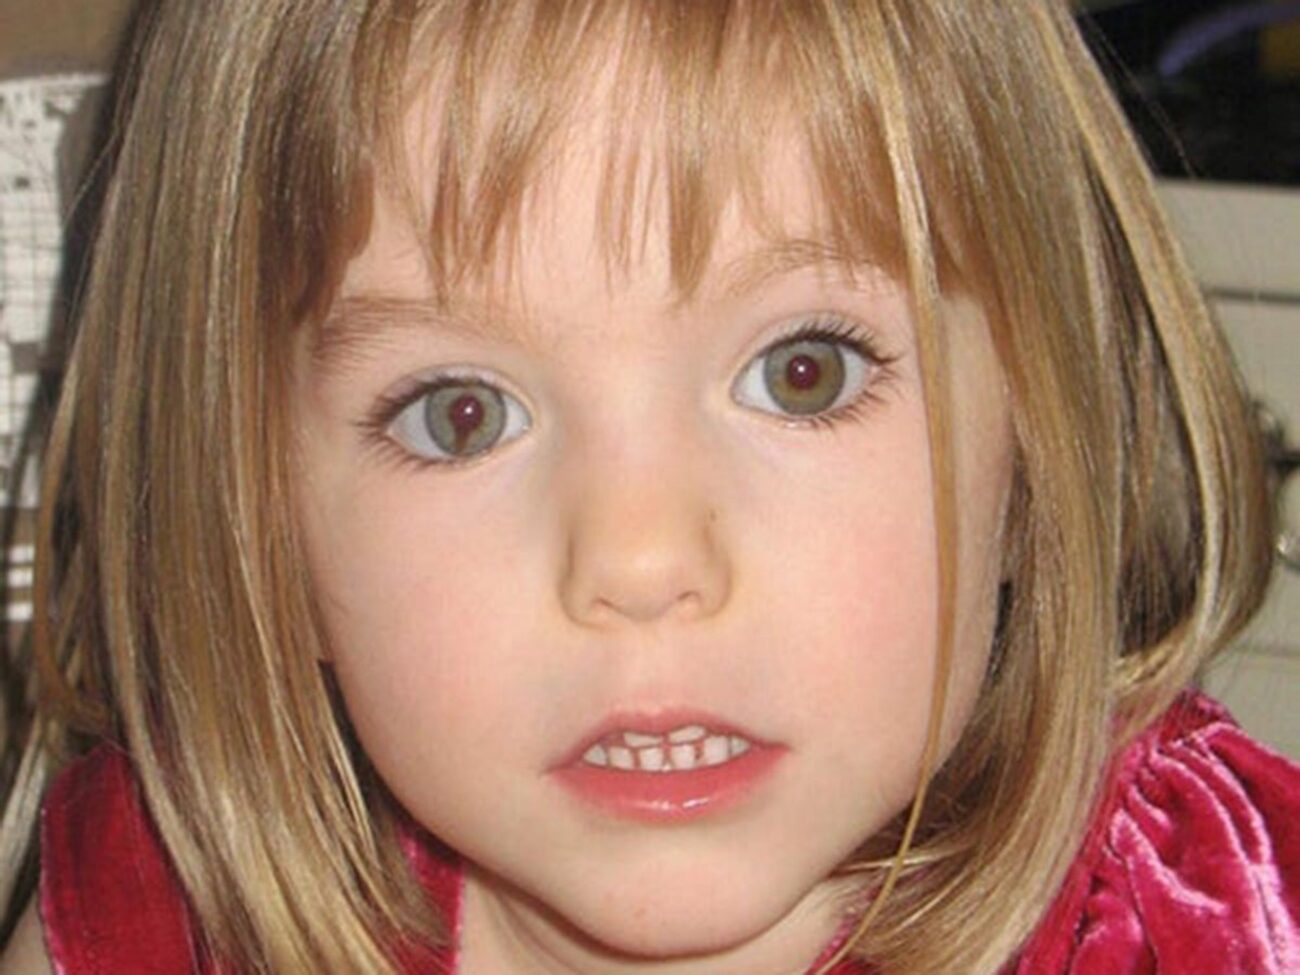 After fourteen years, police believe they may have found the culprit of the infamous disappearance of three-year-old Madeleine McCann. Is she still alive?